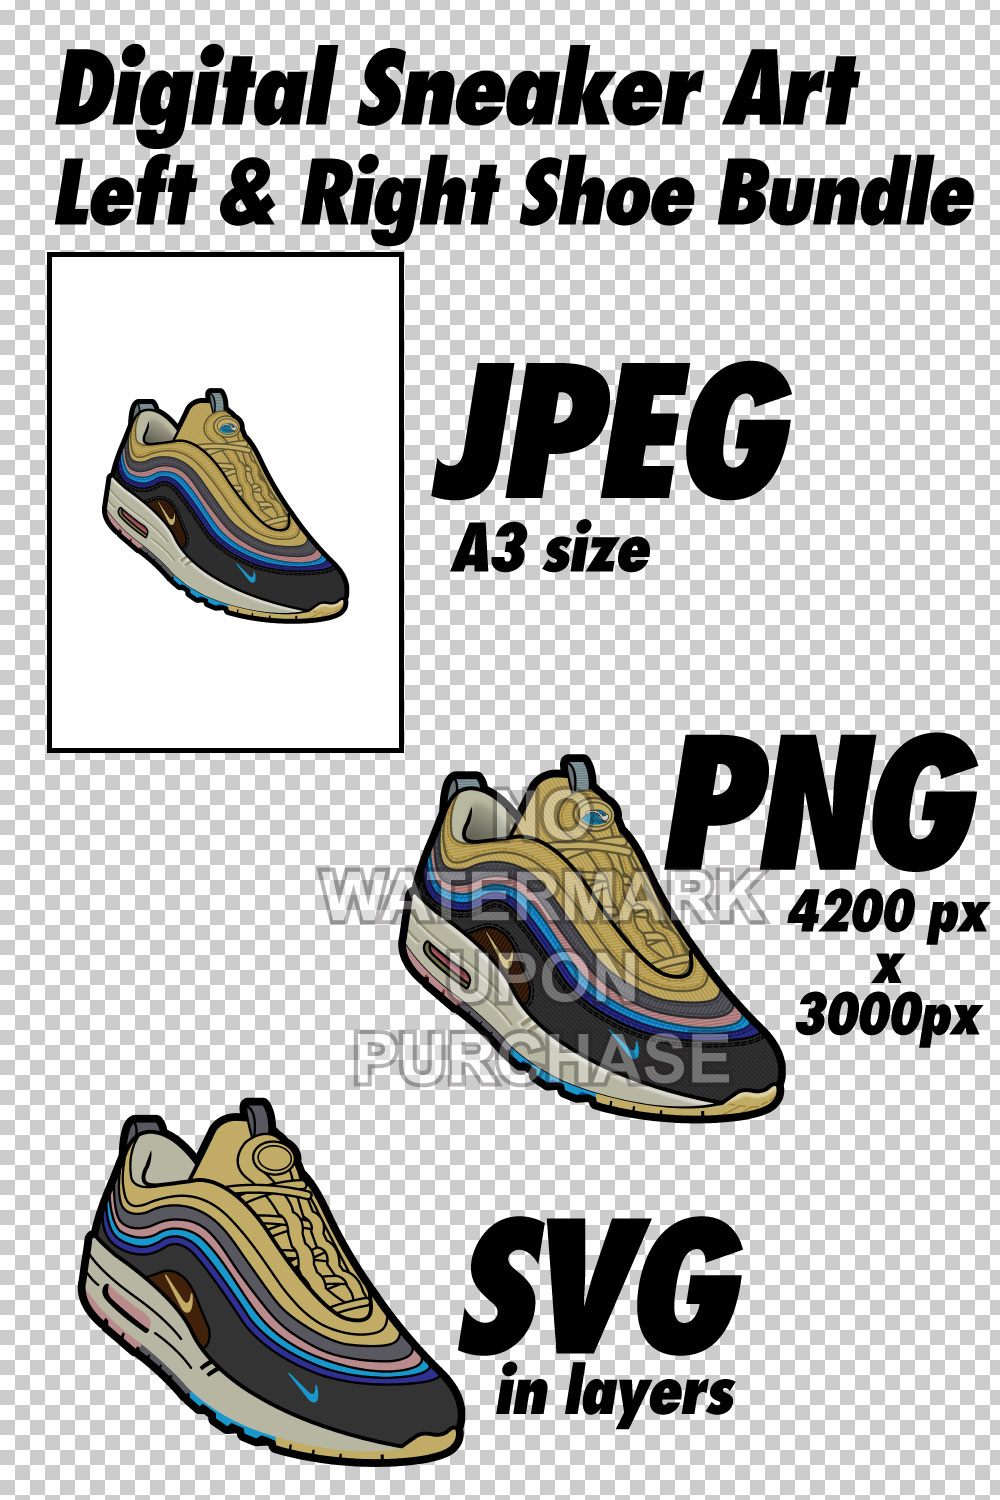 Air Max 1-97 Sean Wotherspoon JPEG PNG SVG Left & Right shoe bundle digital download pinterest preview image.